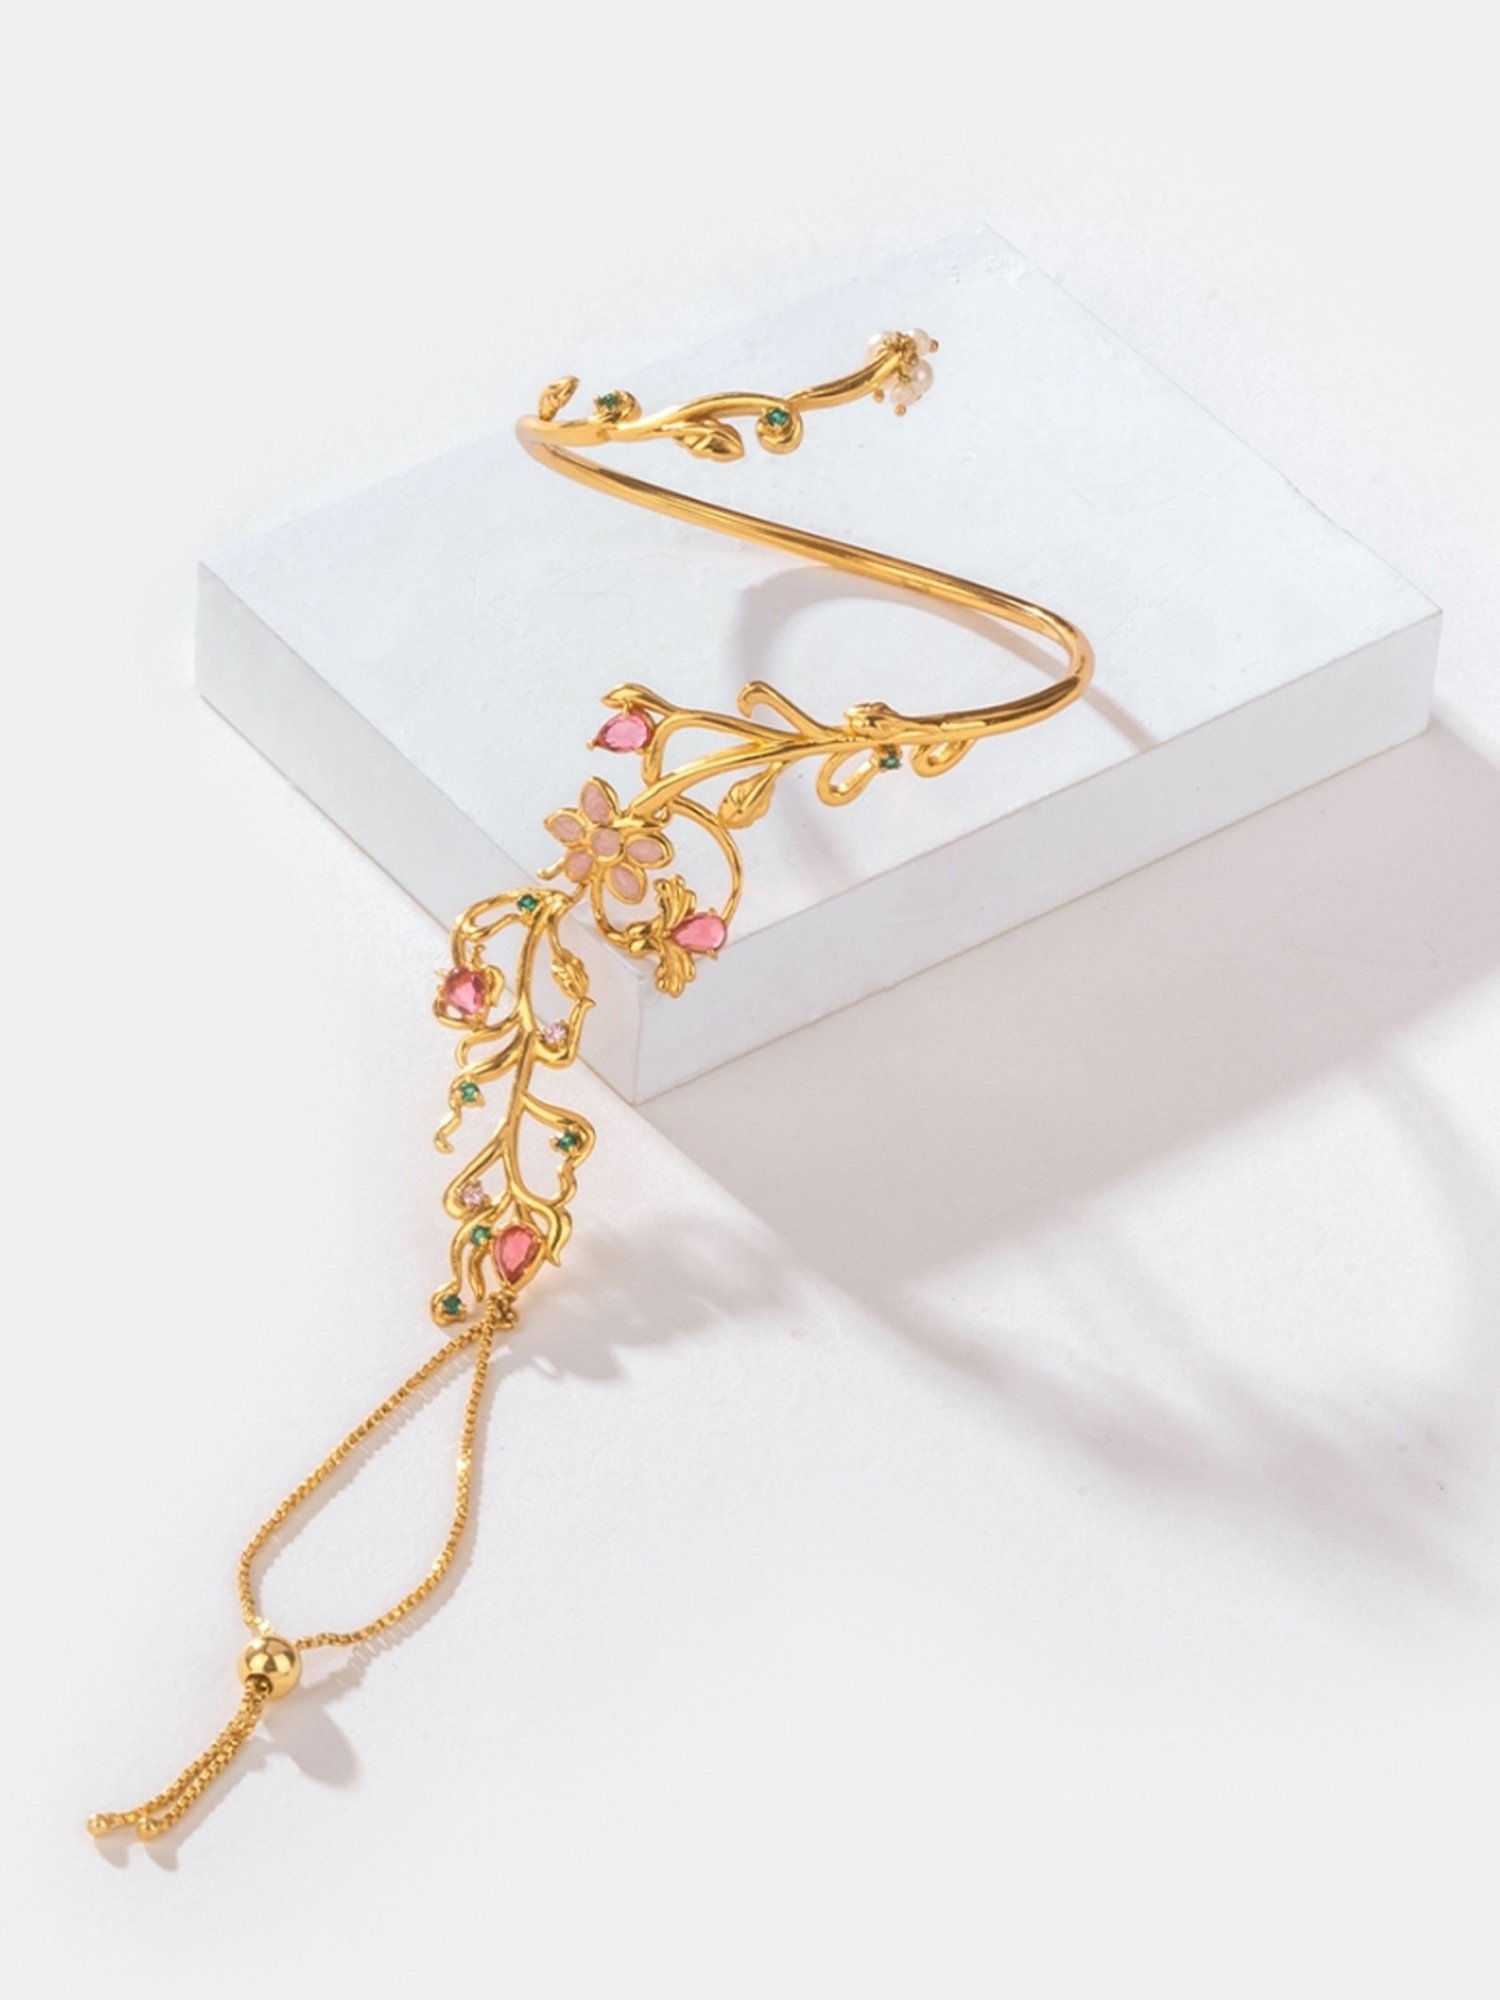 Mark Your Calendars For This Jewellery Brand's Three-Day Pop Up | LBB